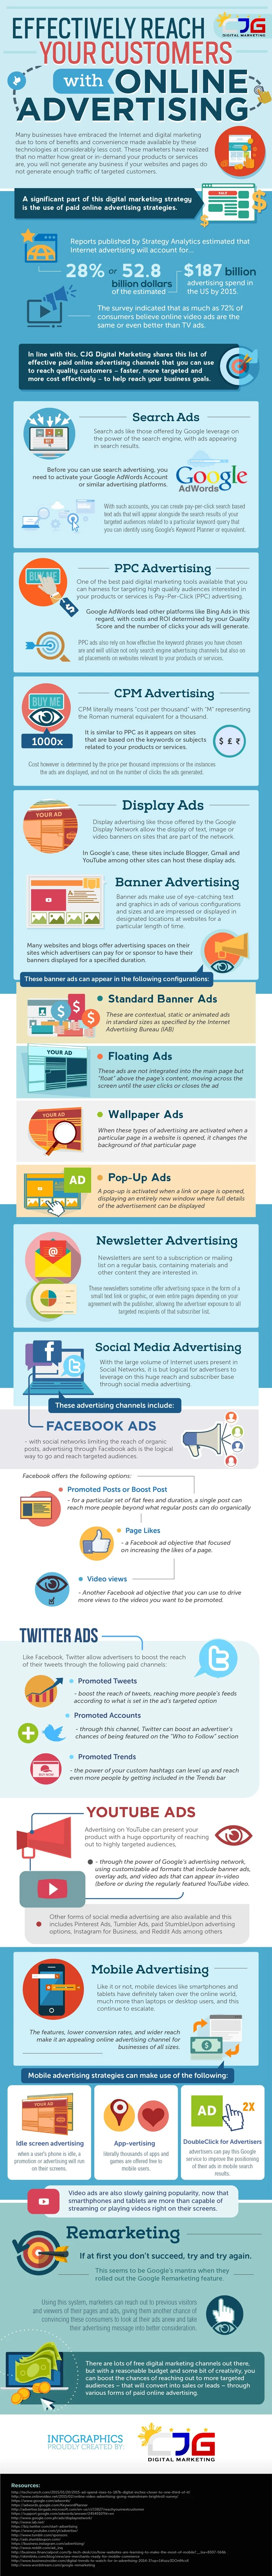 Effectively Reach Your Customers with Online Advertising - #Infographic